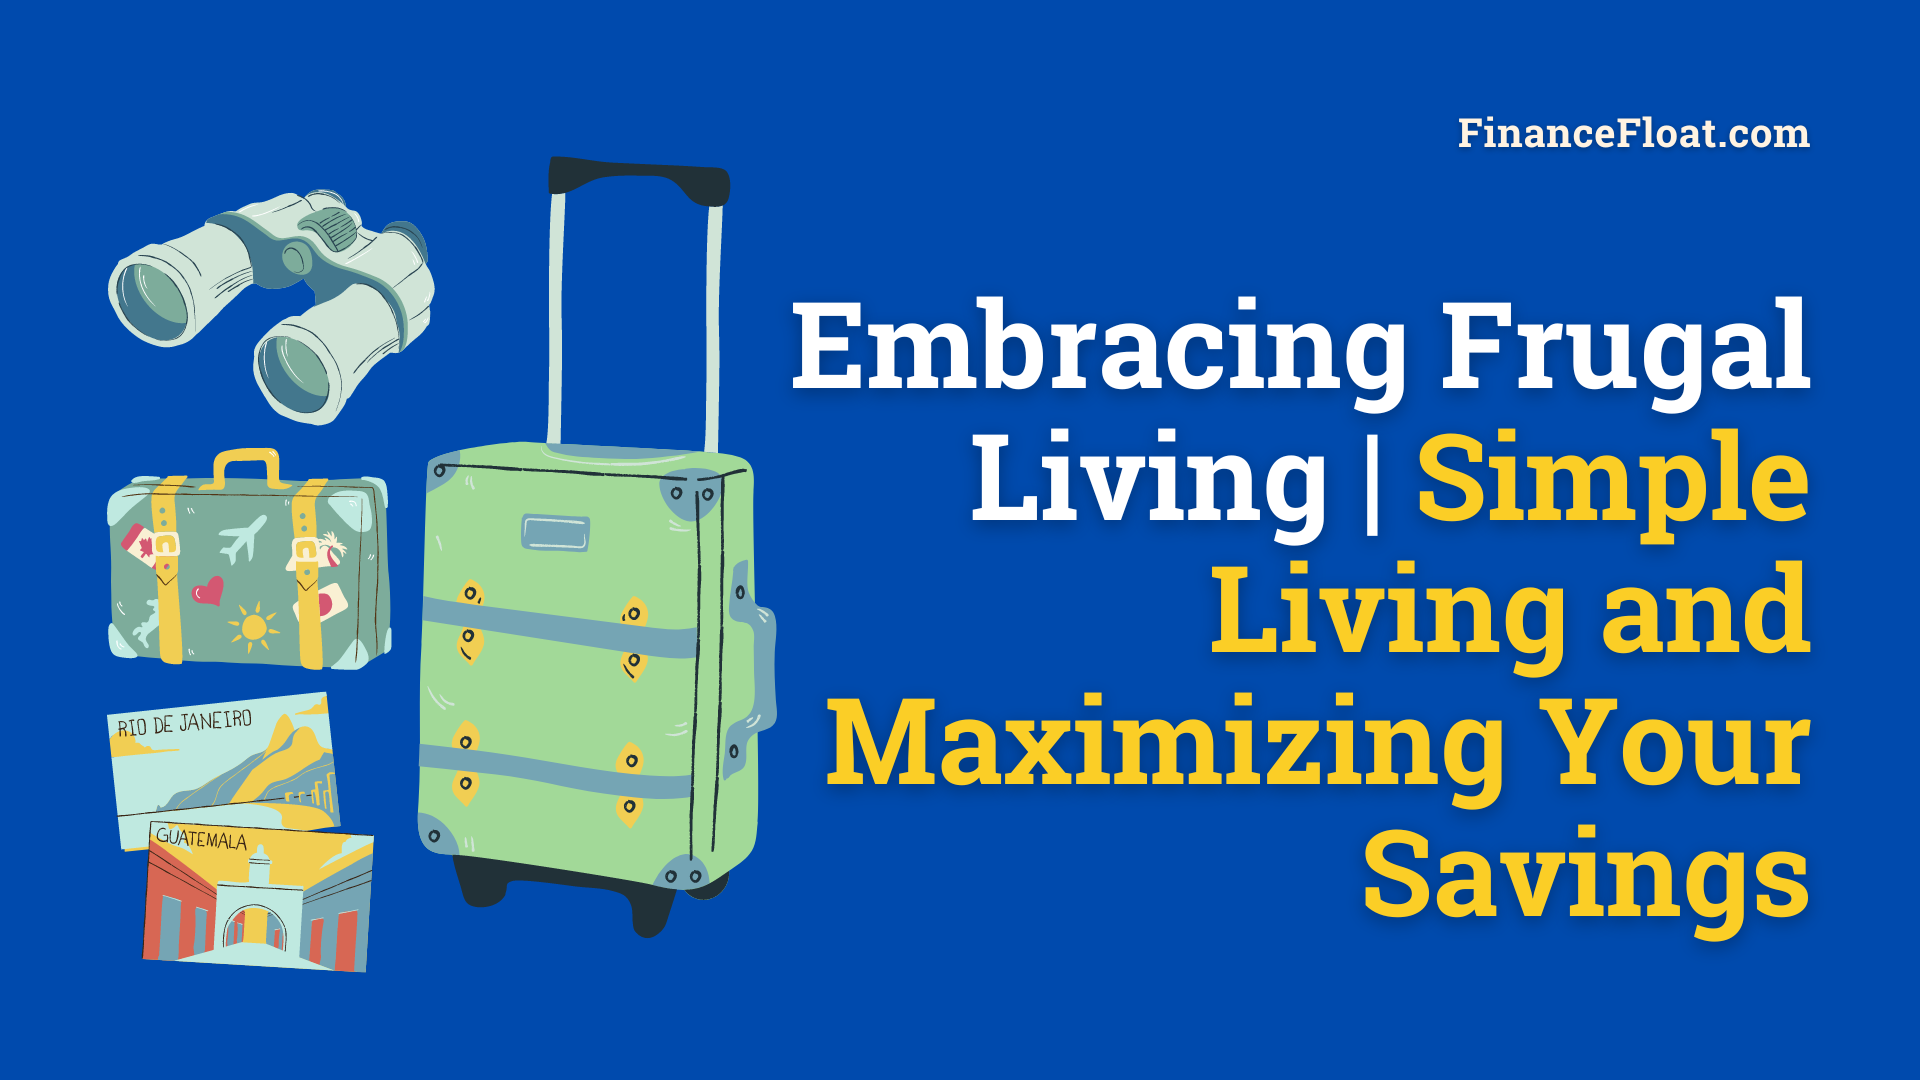 Embracing Frugal Living Simple Living and Maximizing Your Savings